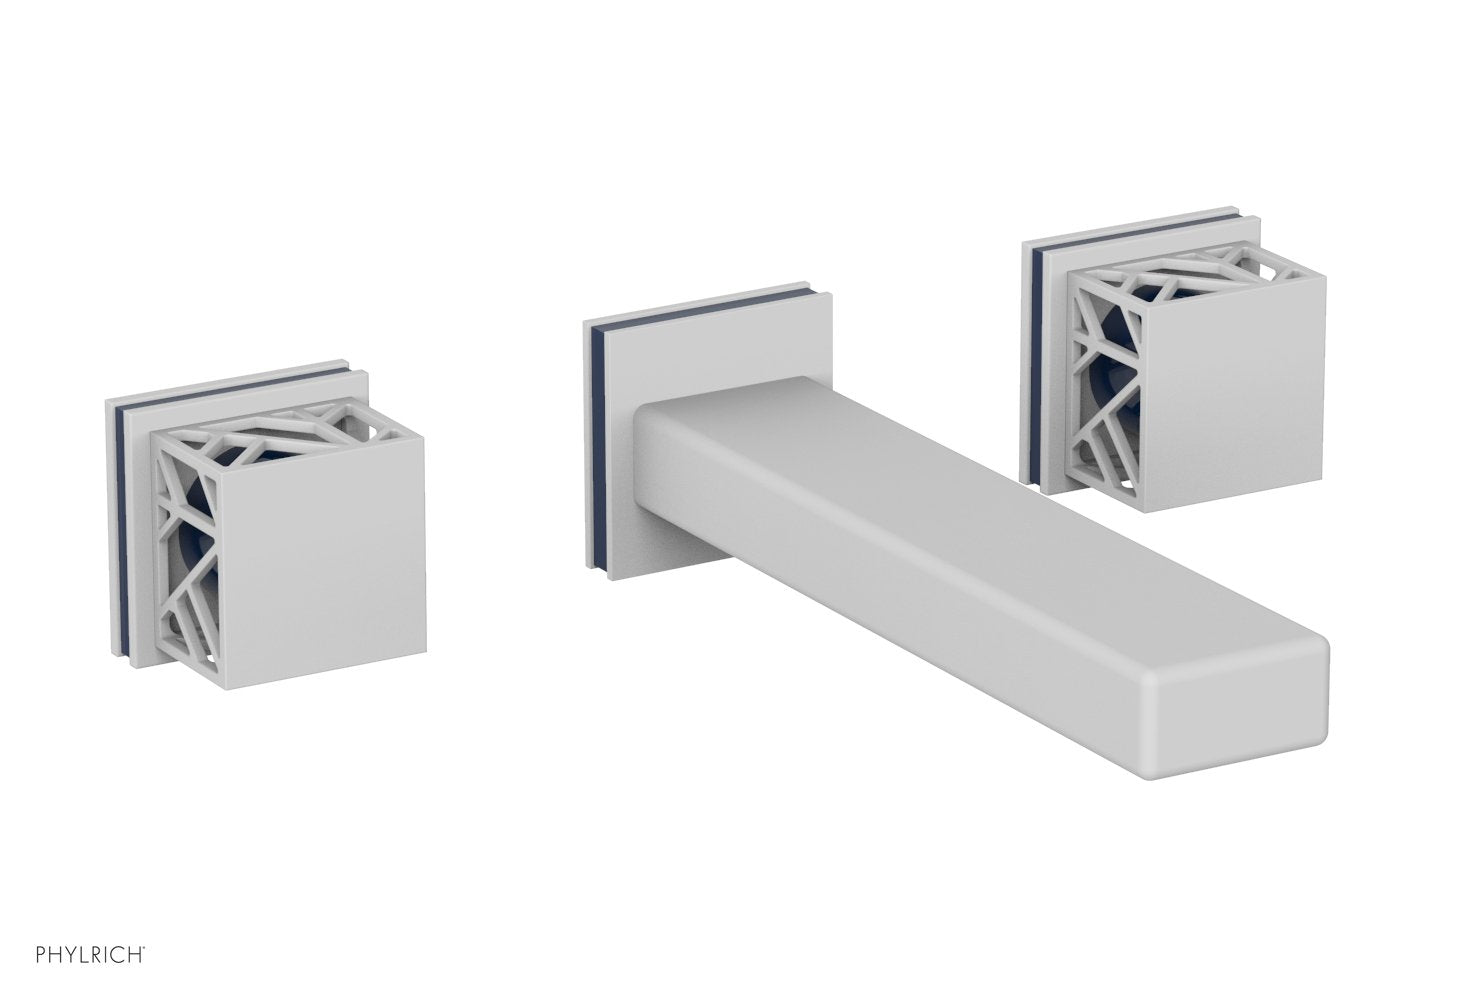 Phylrich JOLIE Wall Lavatory Set - Square Handles with "Navy blue" Accents